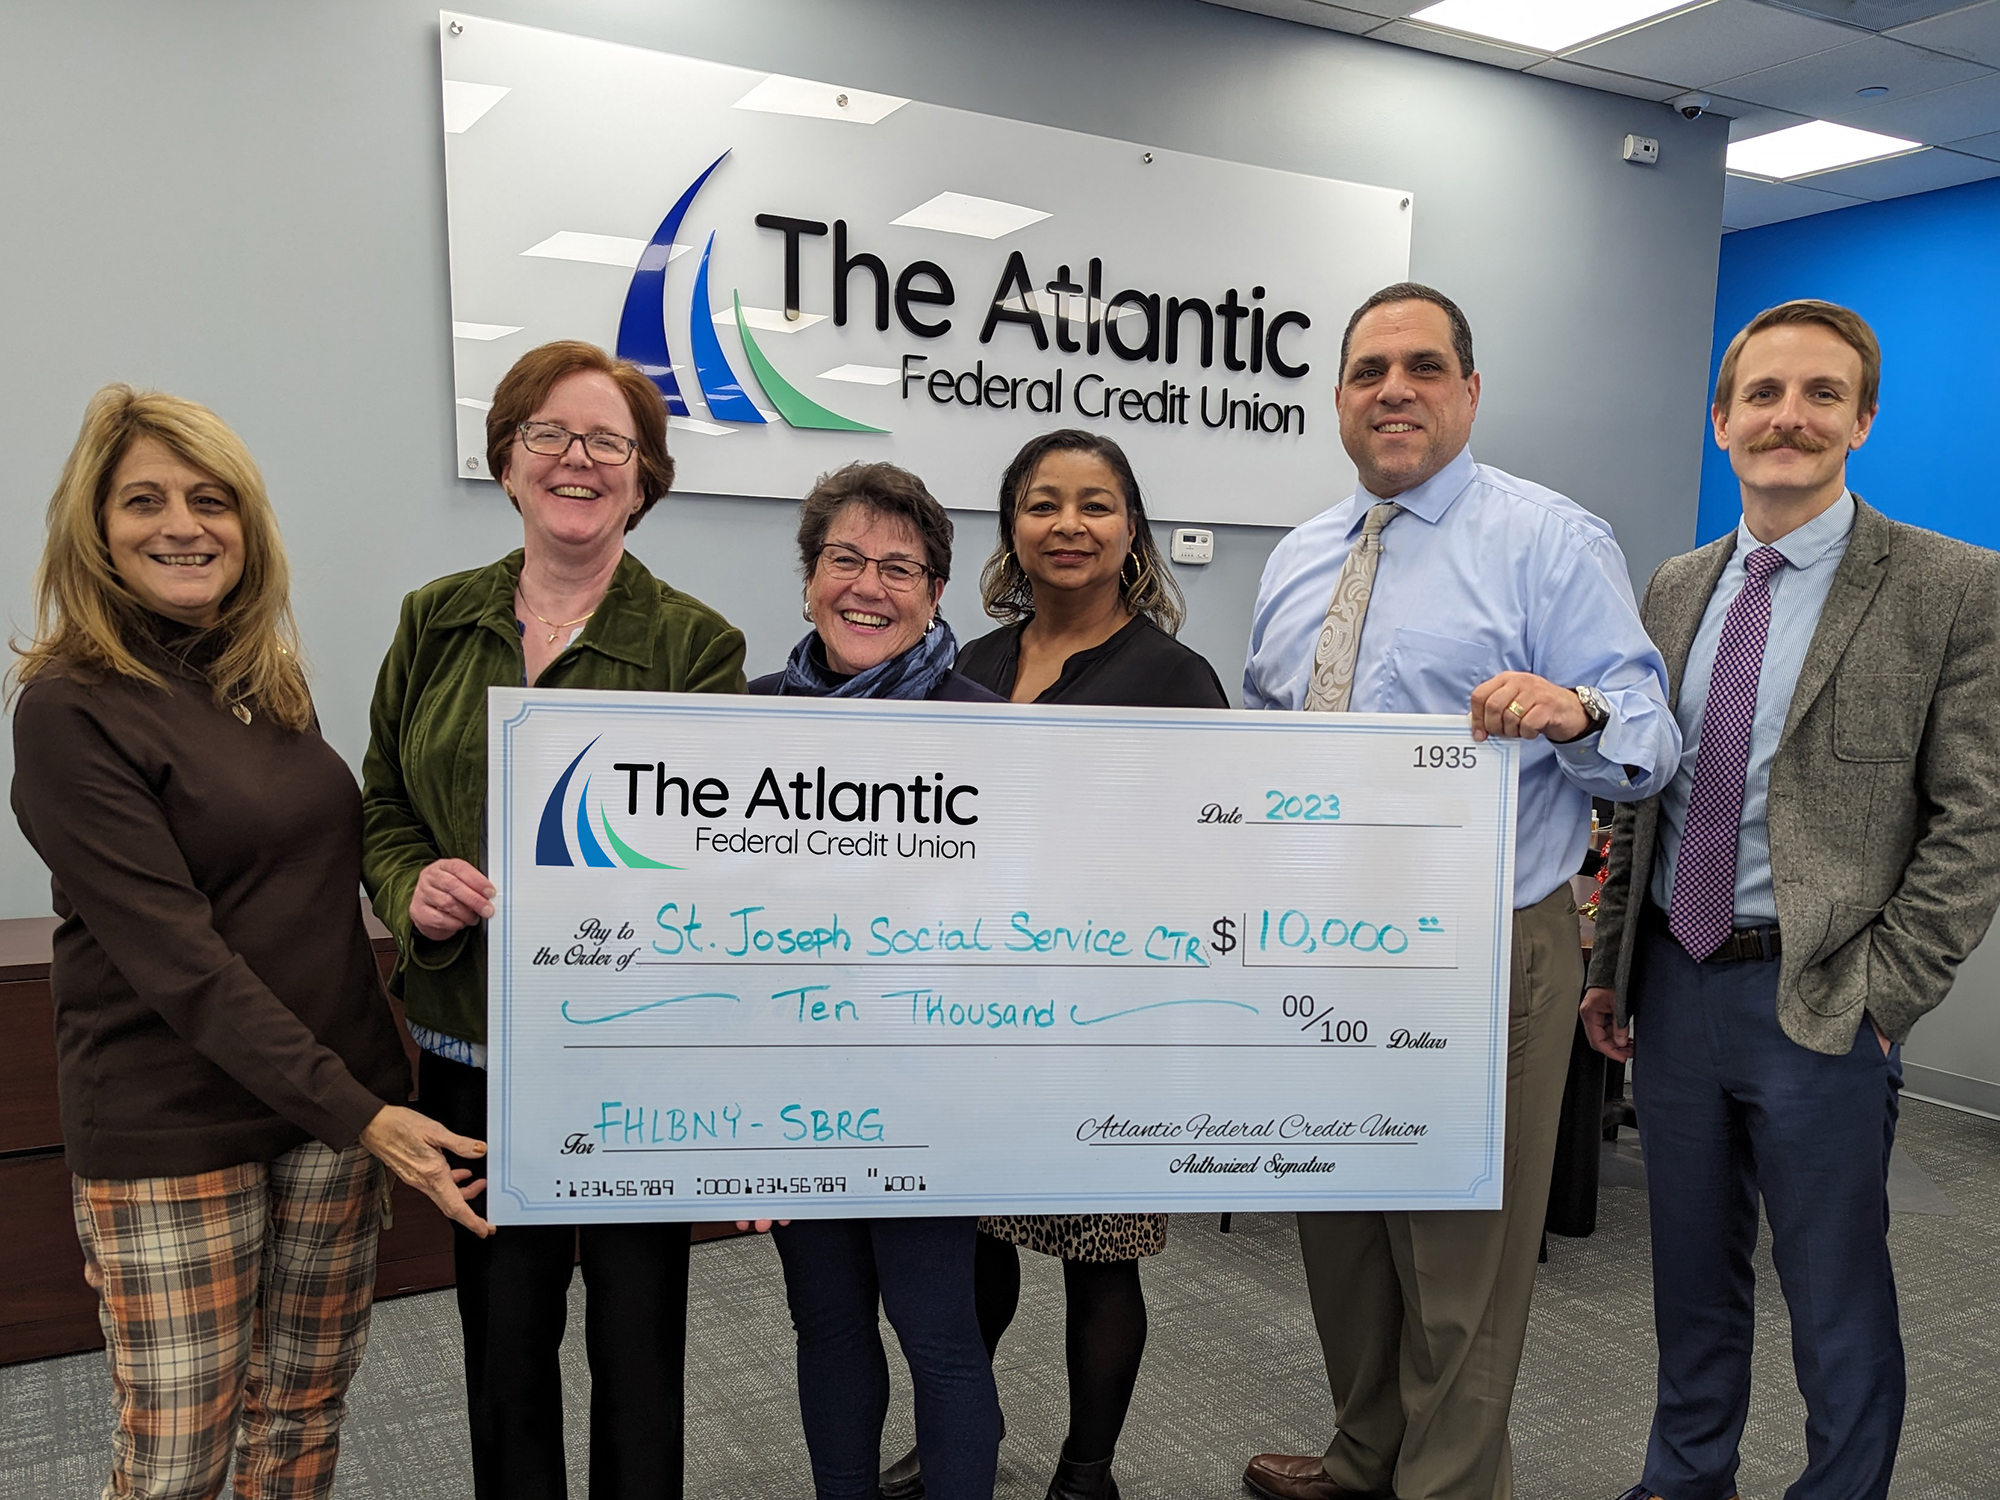 Photo of representatives from St. Joseph Social Service Center accepting an oversized check of $10,000 through the FHLBNY SBRG from representatives of The Atlantic